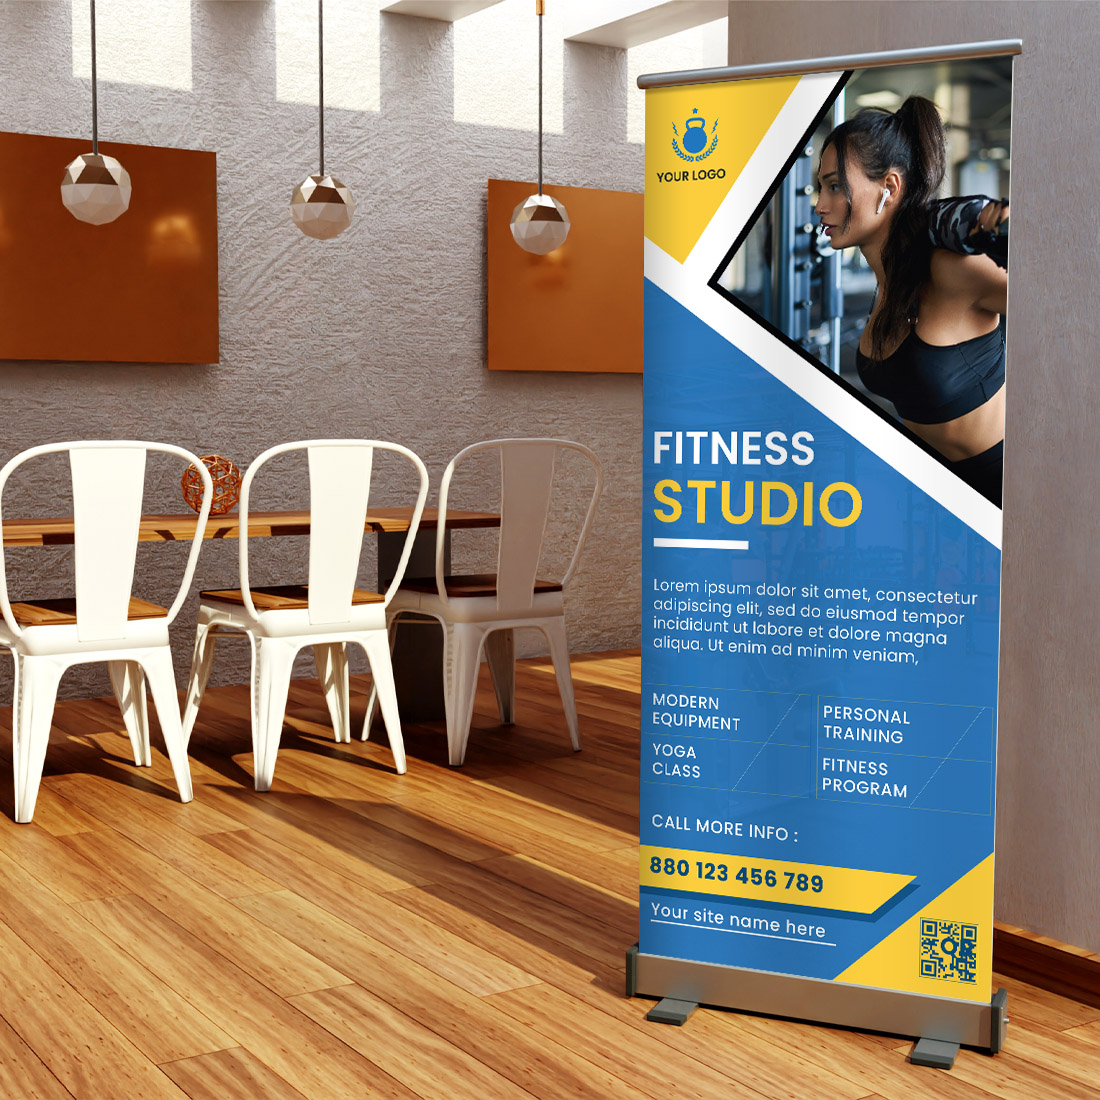 Fitness studio with chairs and a sign.